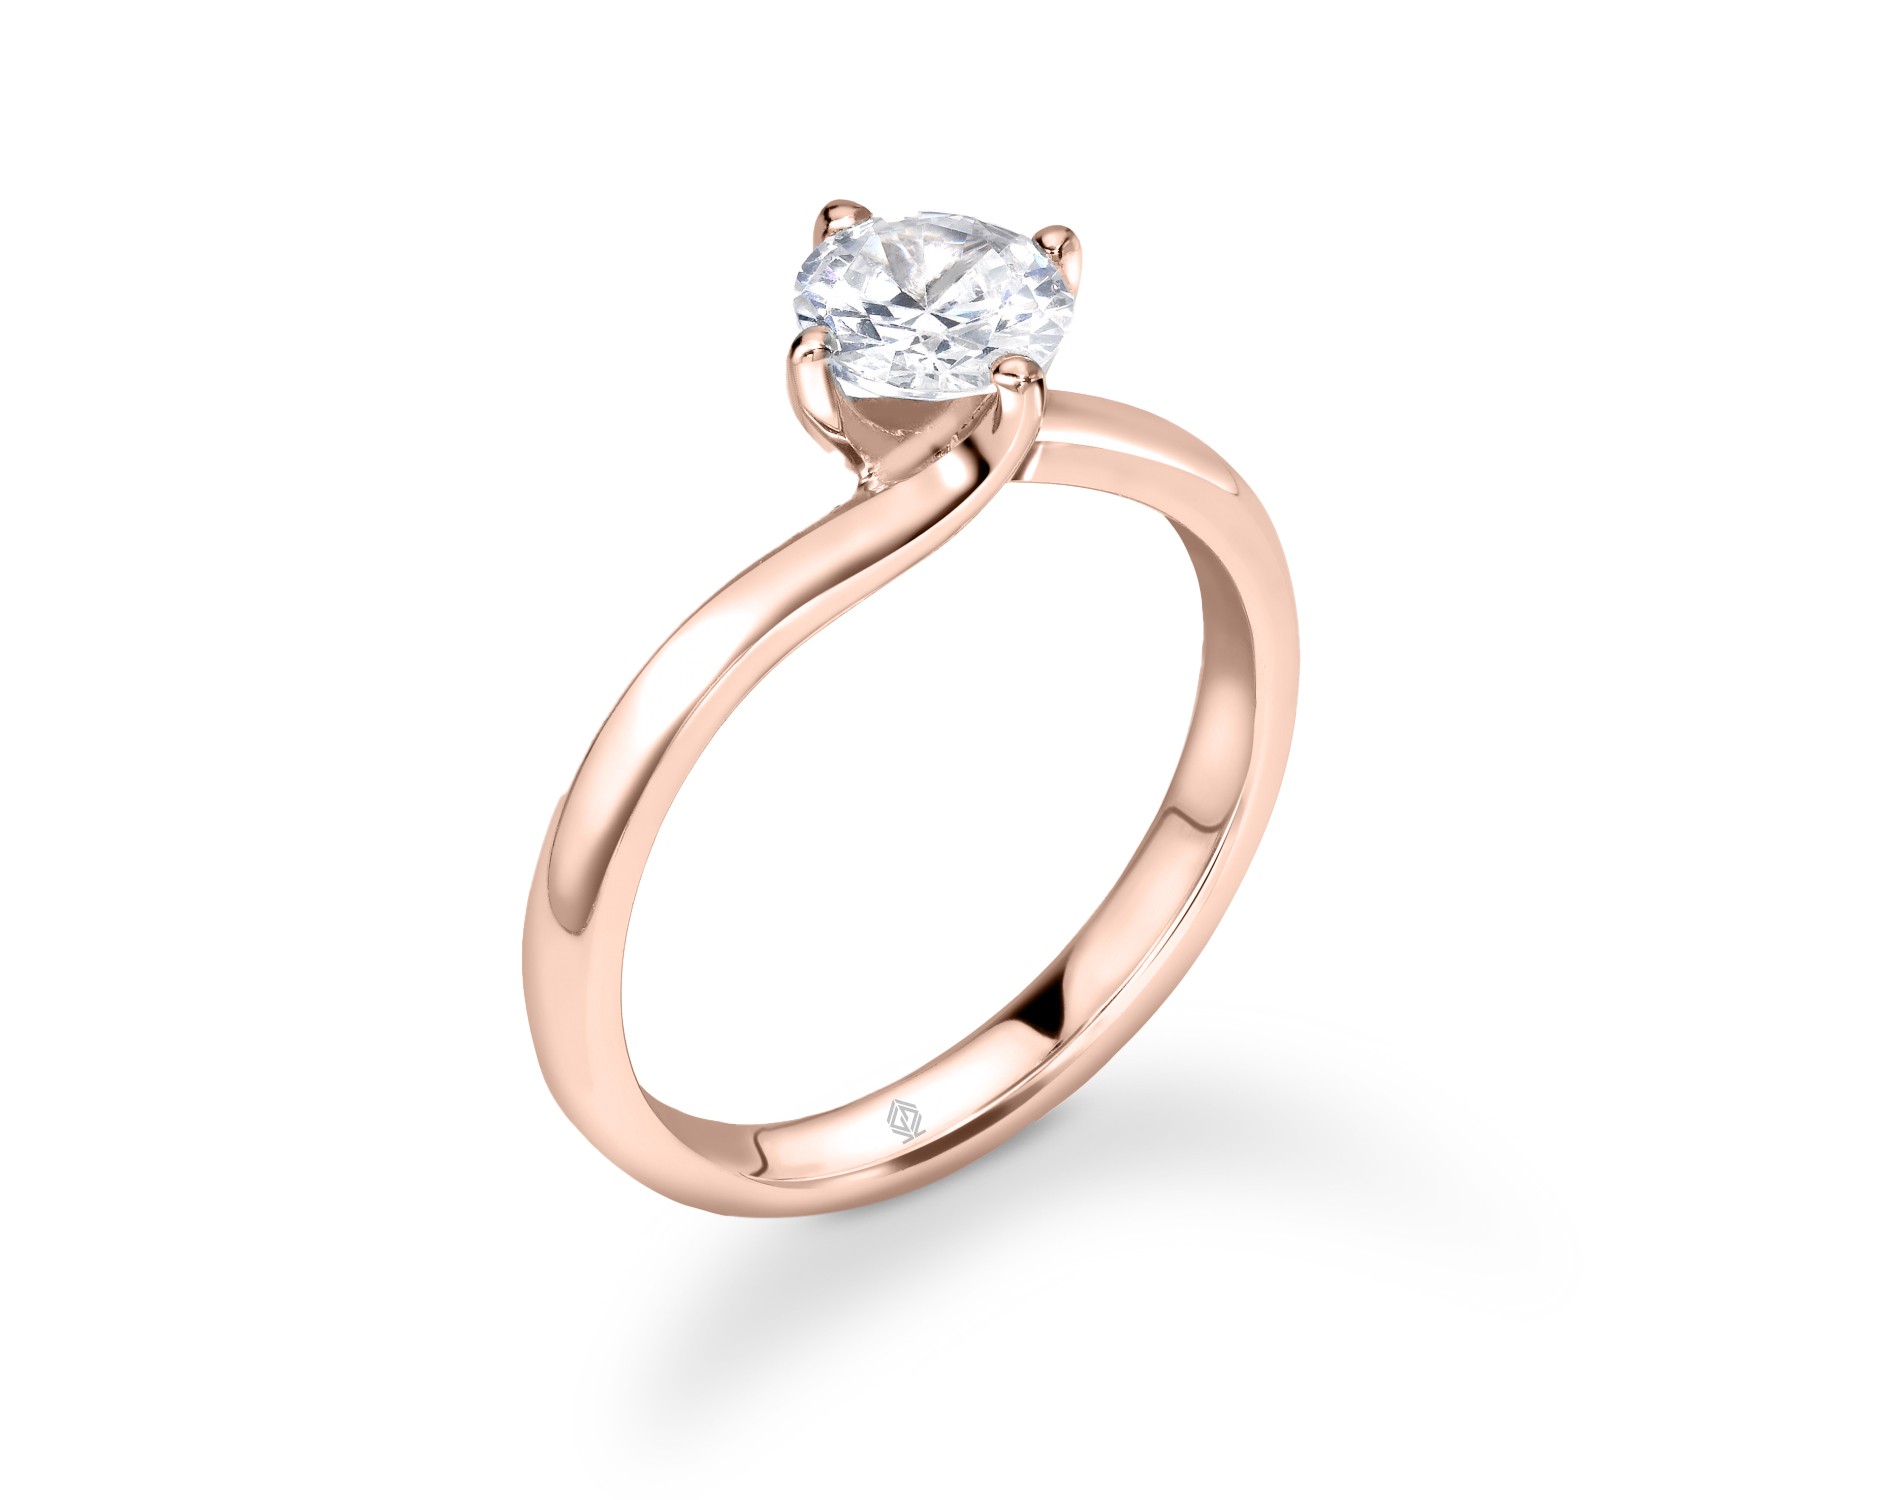 18K ROSE GOLD 4 PRONGS SOLITAIRE TWISTED HEAD ROUND CUT DIAMOND ENGAGEMENT RING